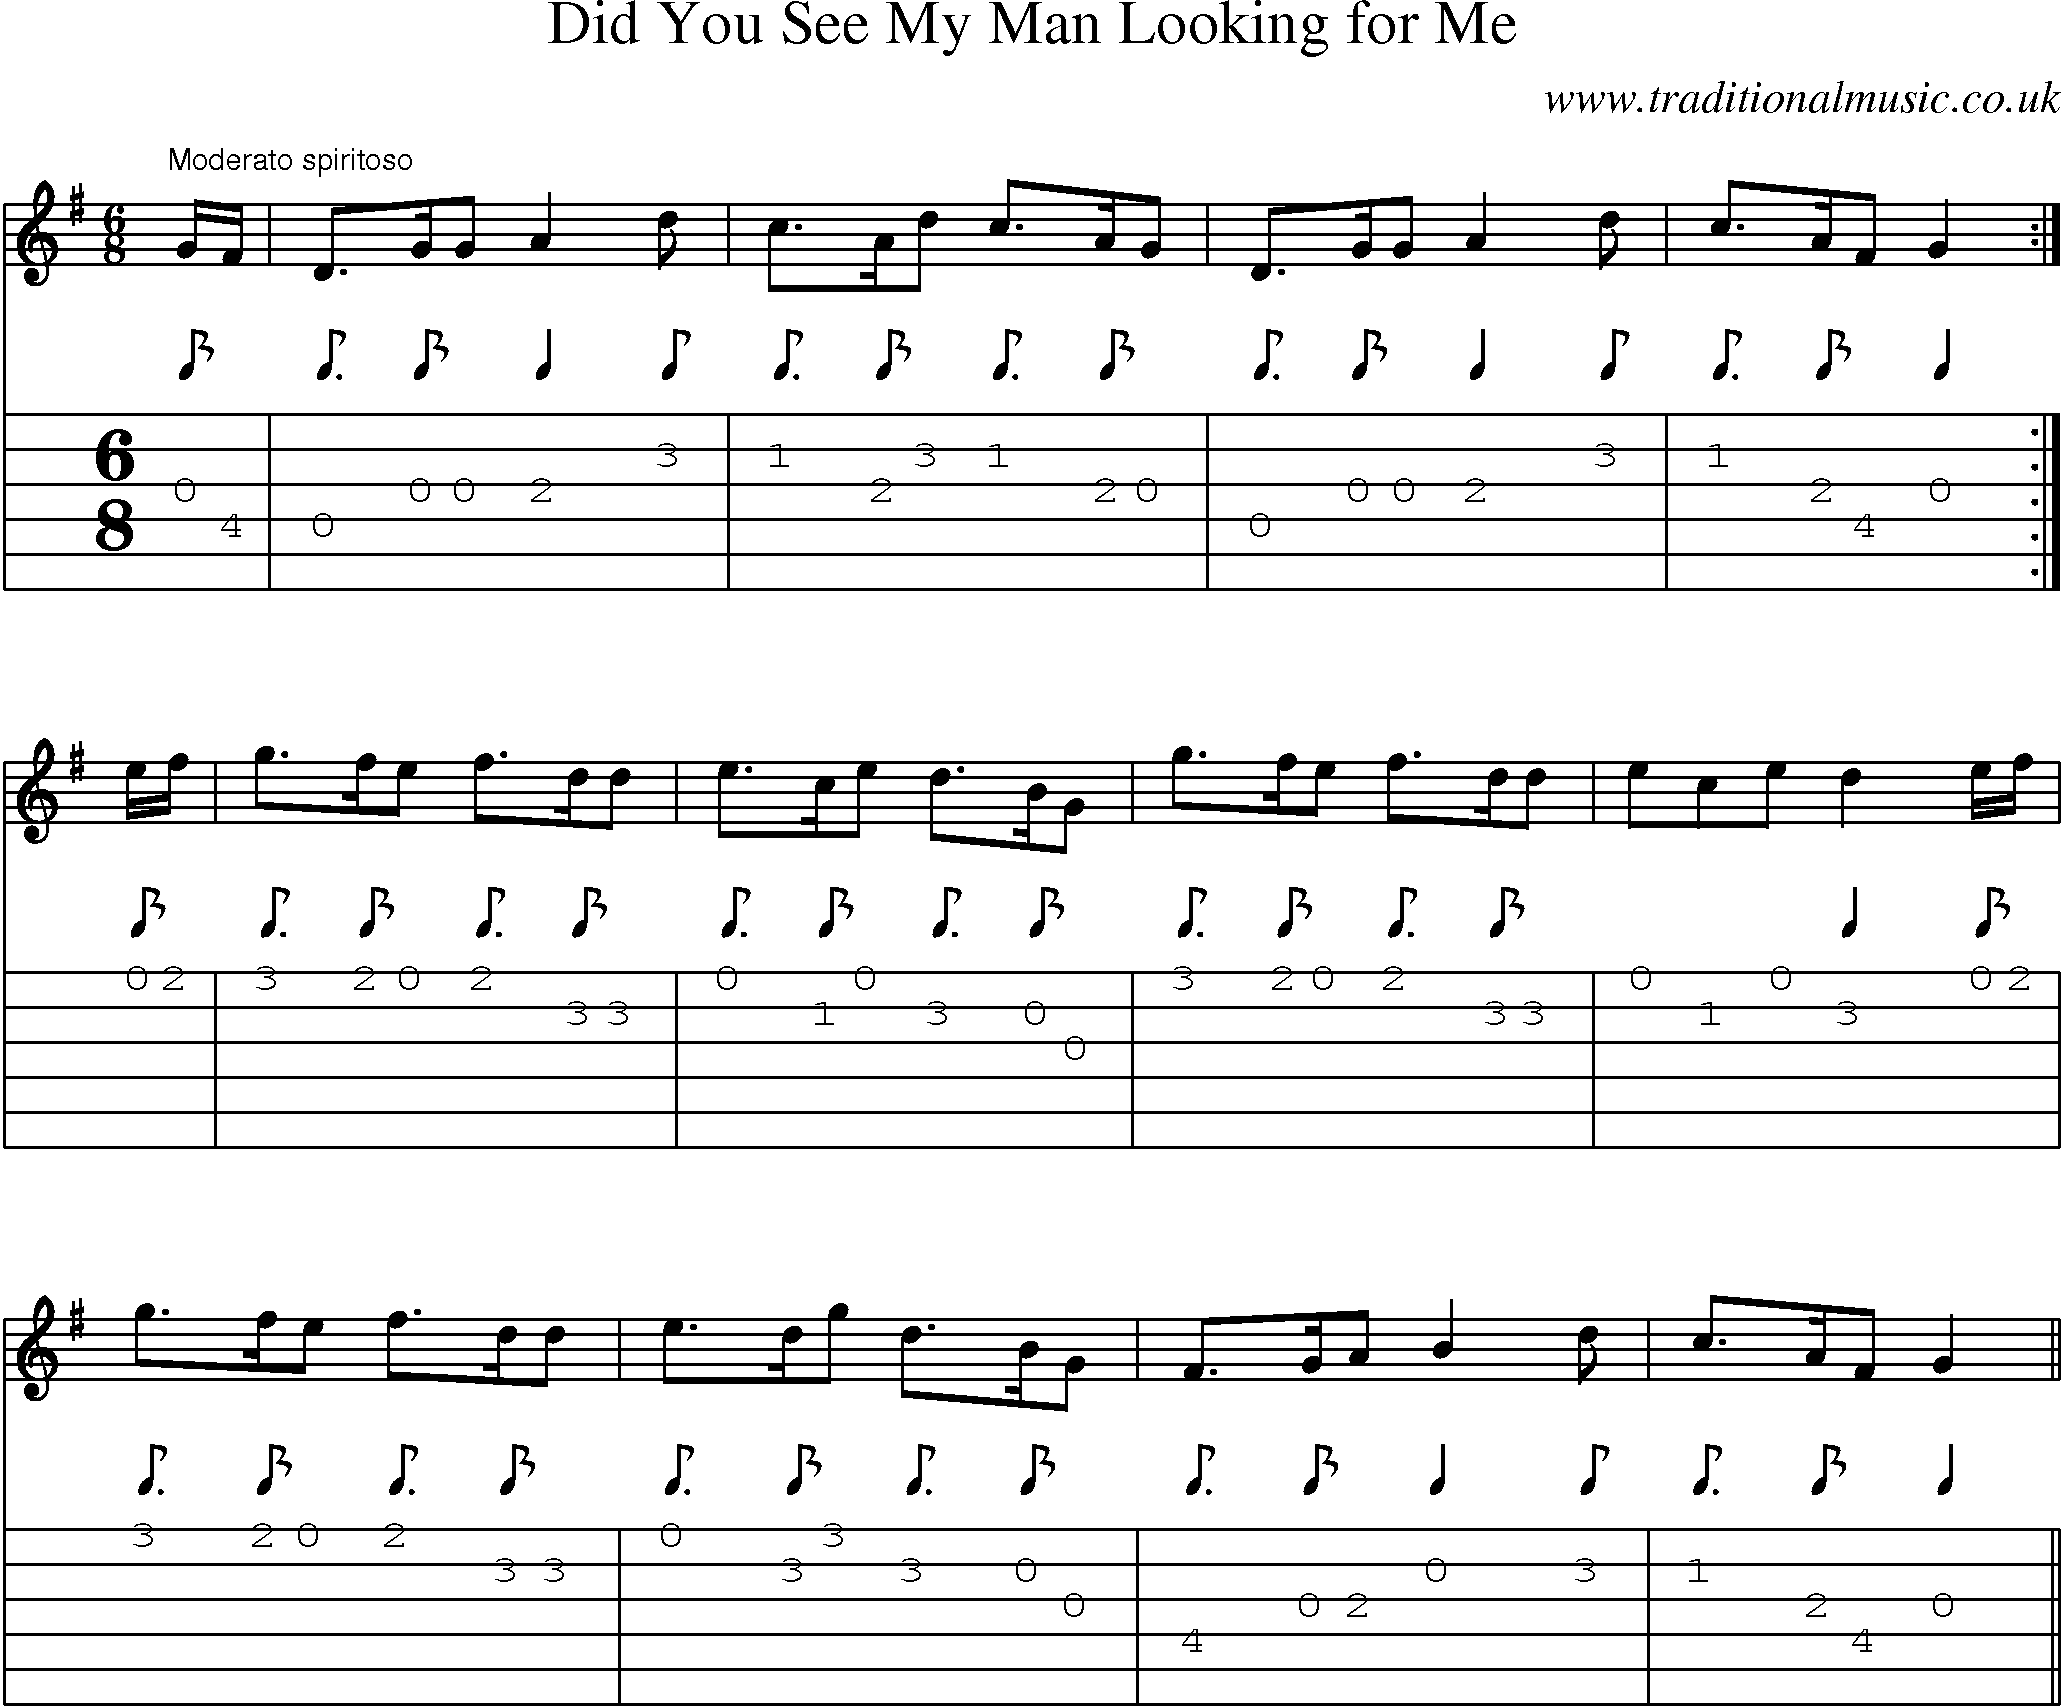 Music Score and Guitar Tabs for Did You See My Man Looking For Me